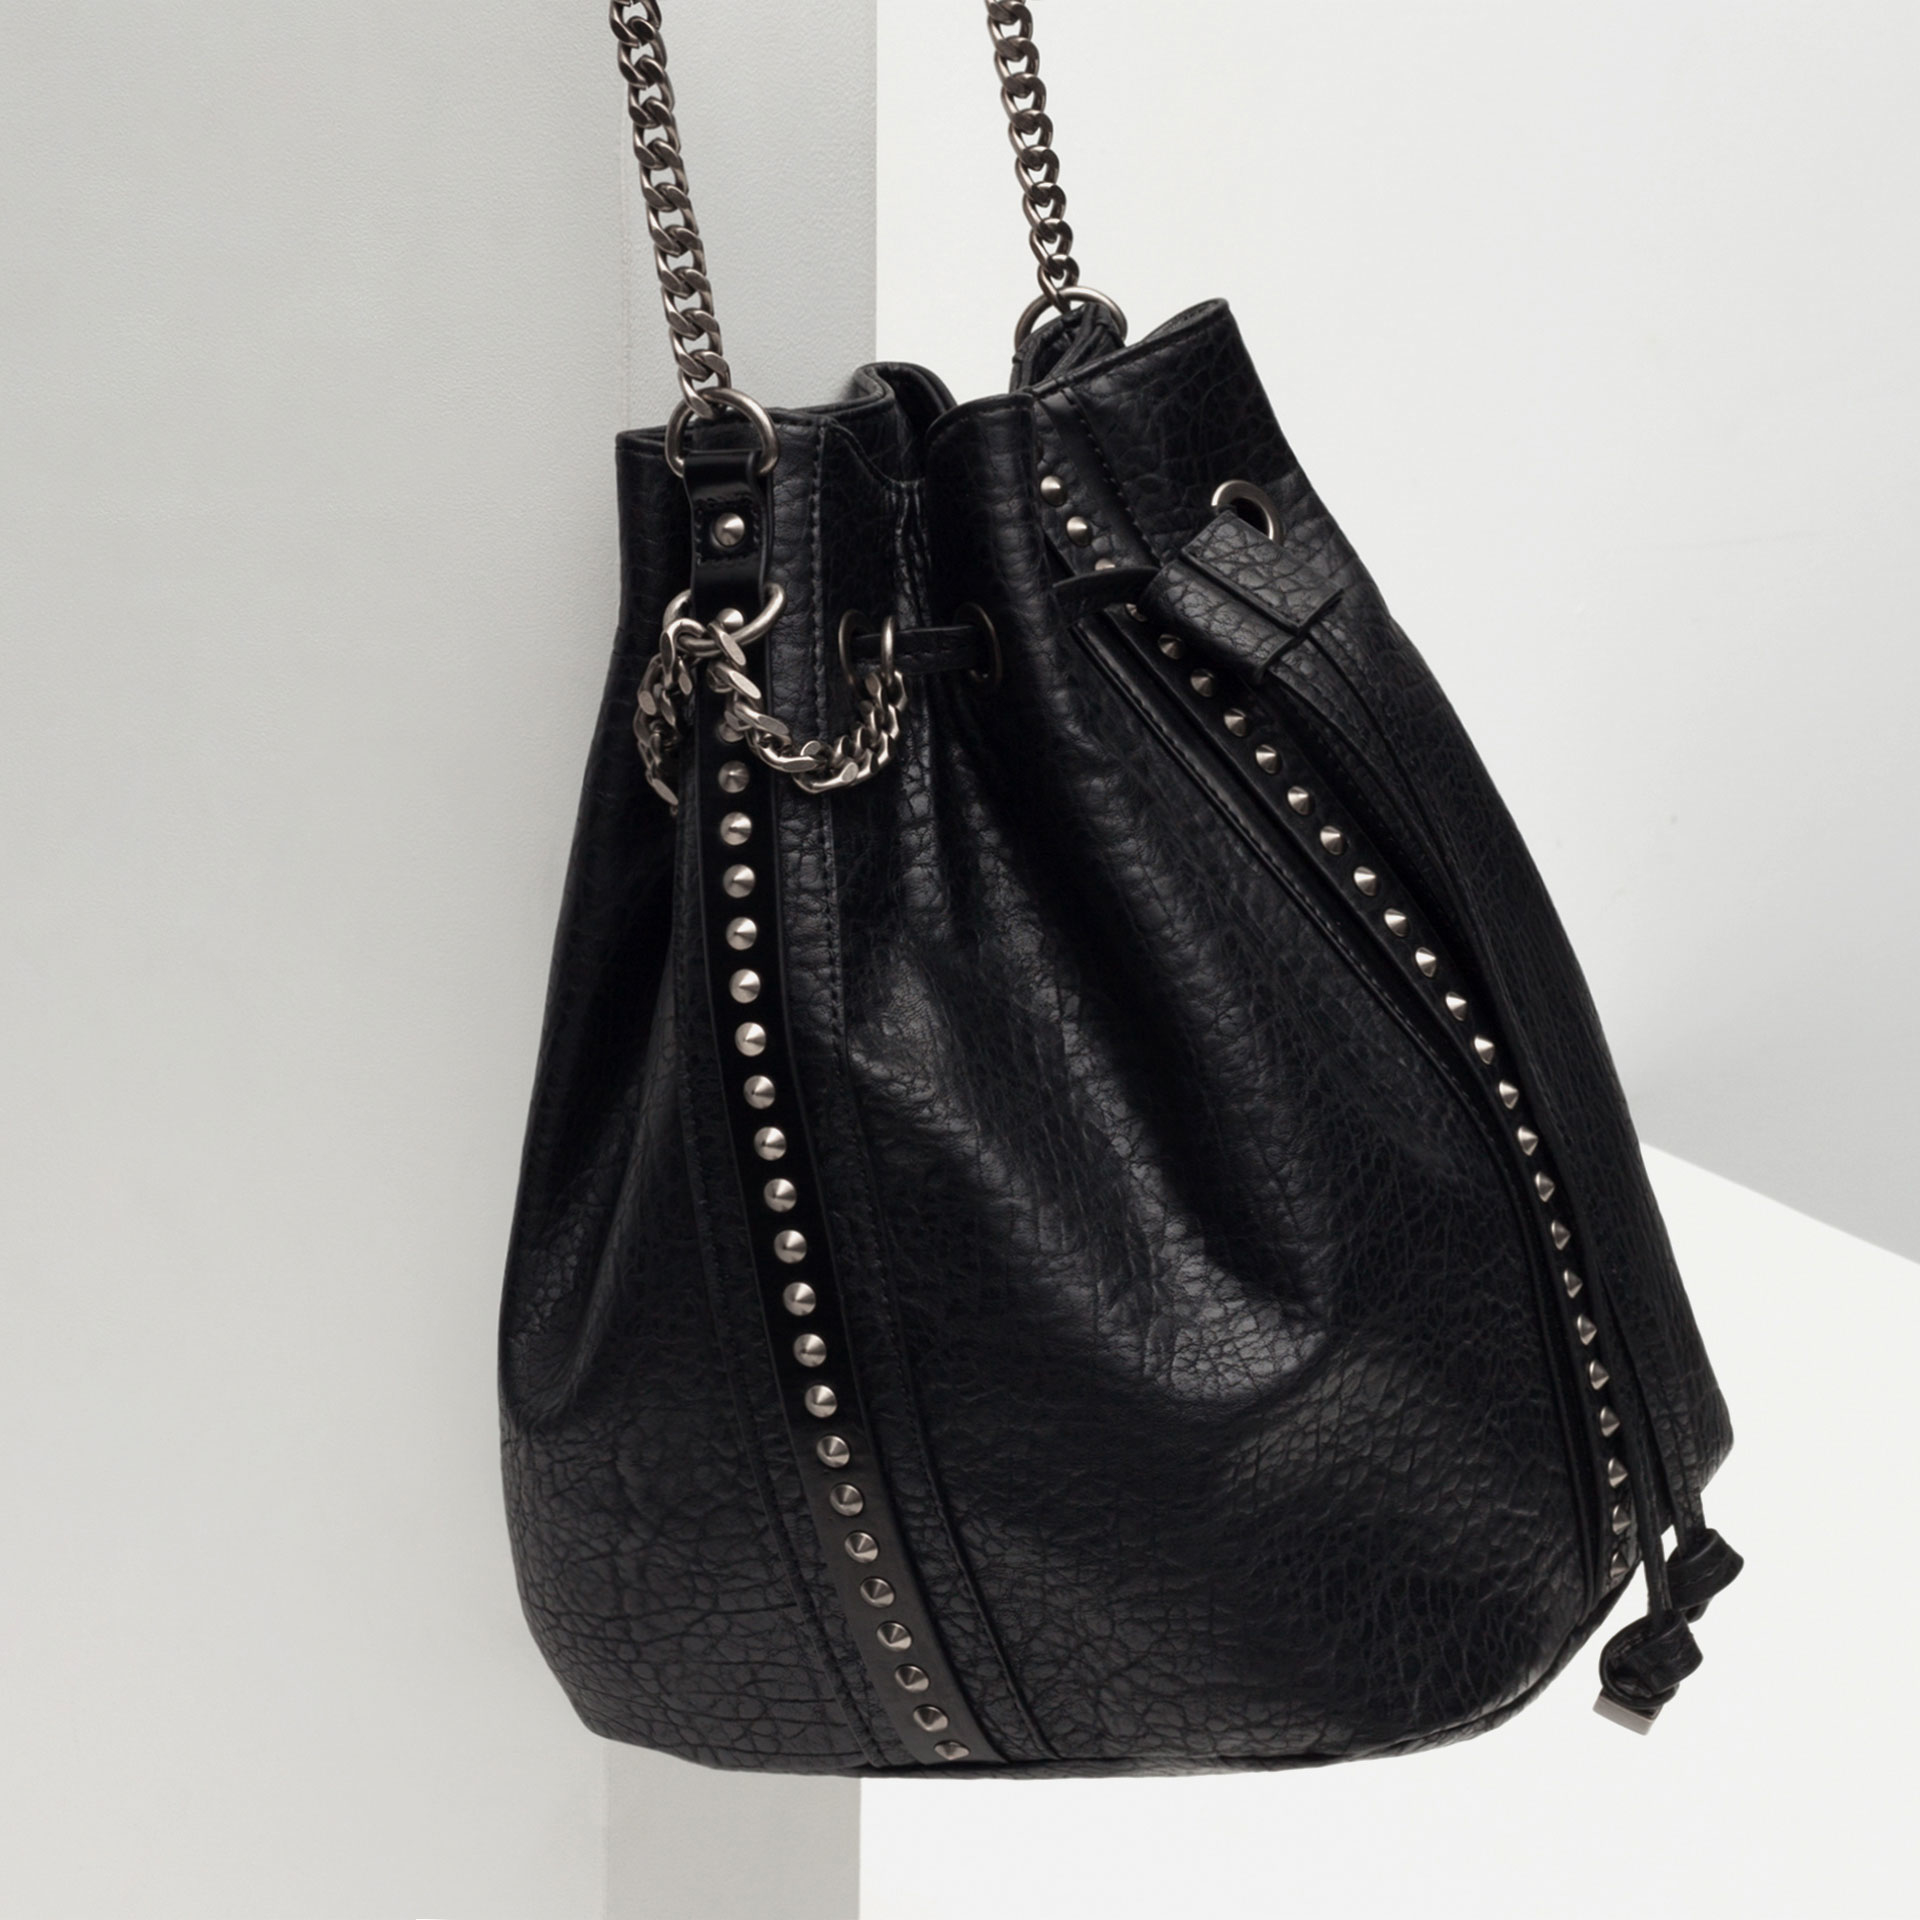 Zara Studs And Chains Bucket Bag in Black | Lyst